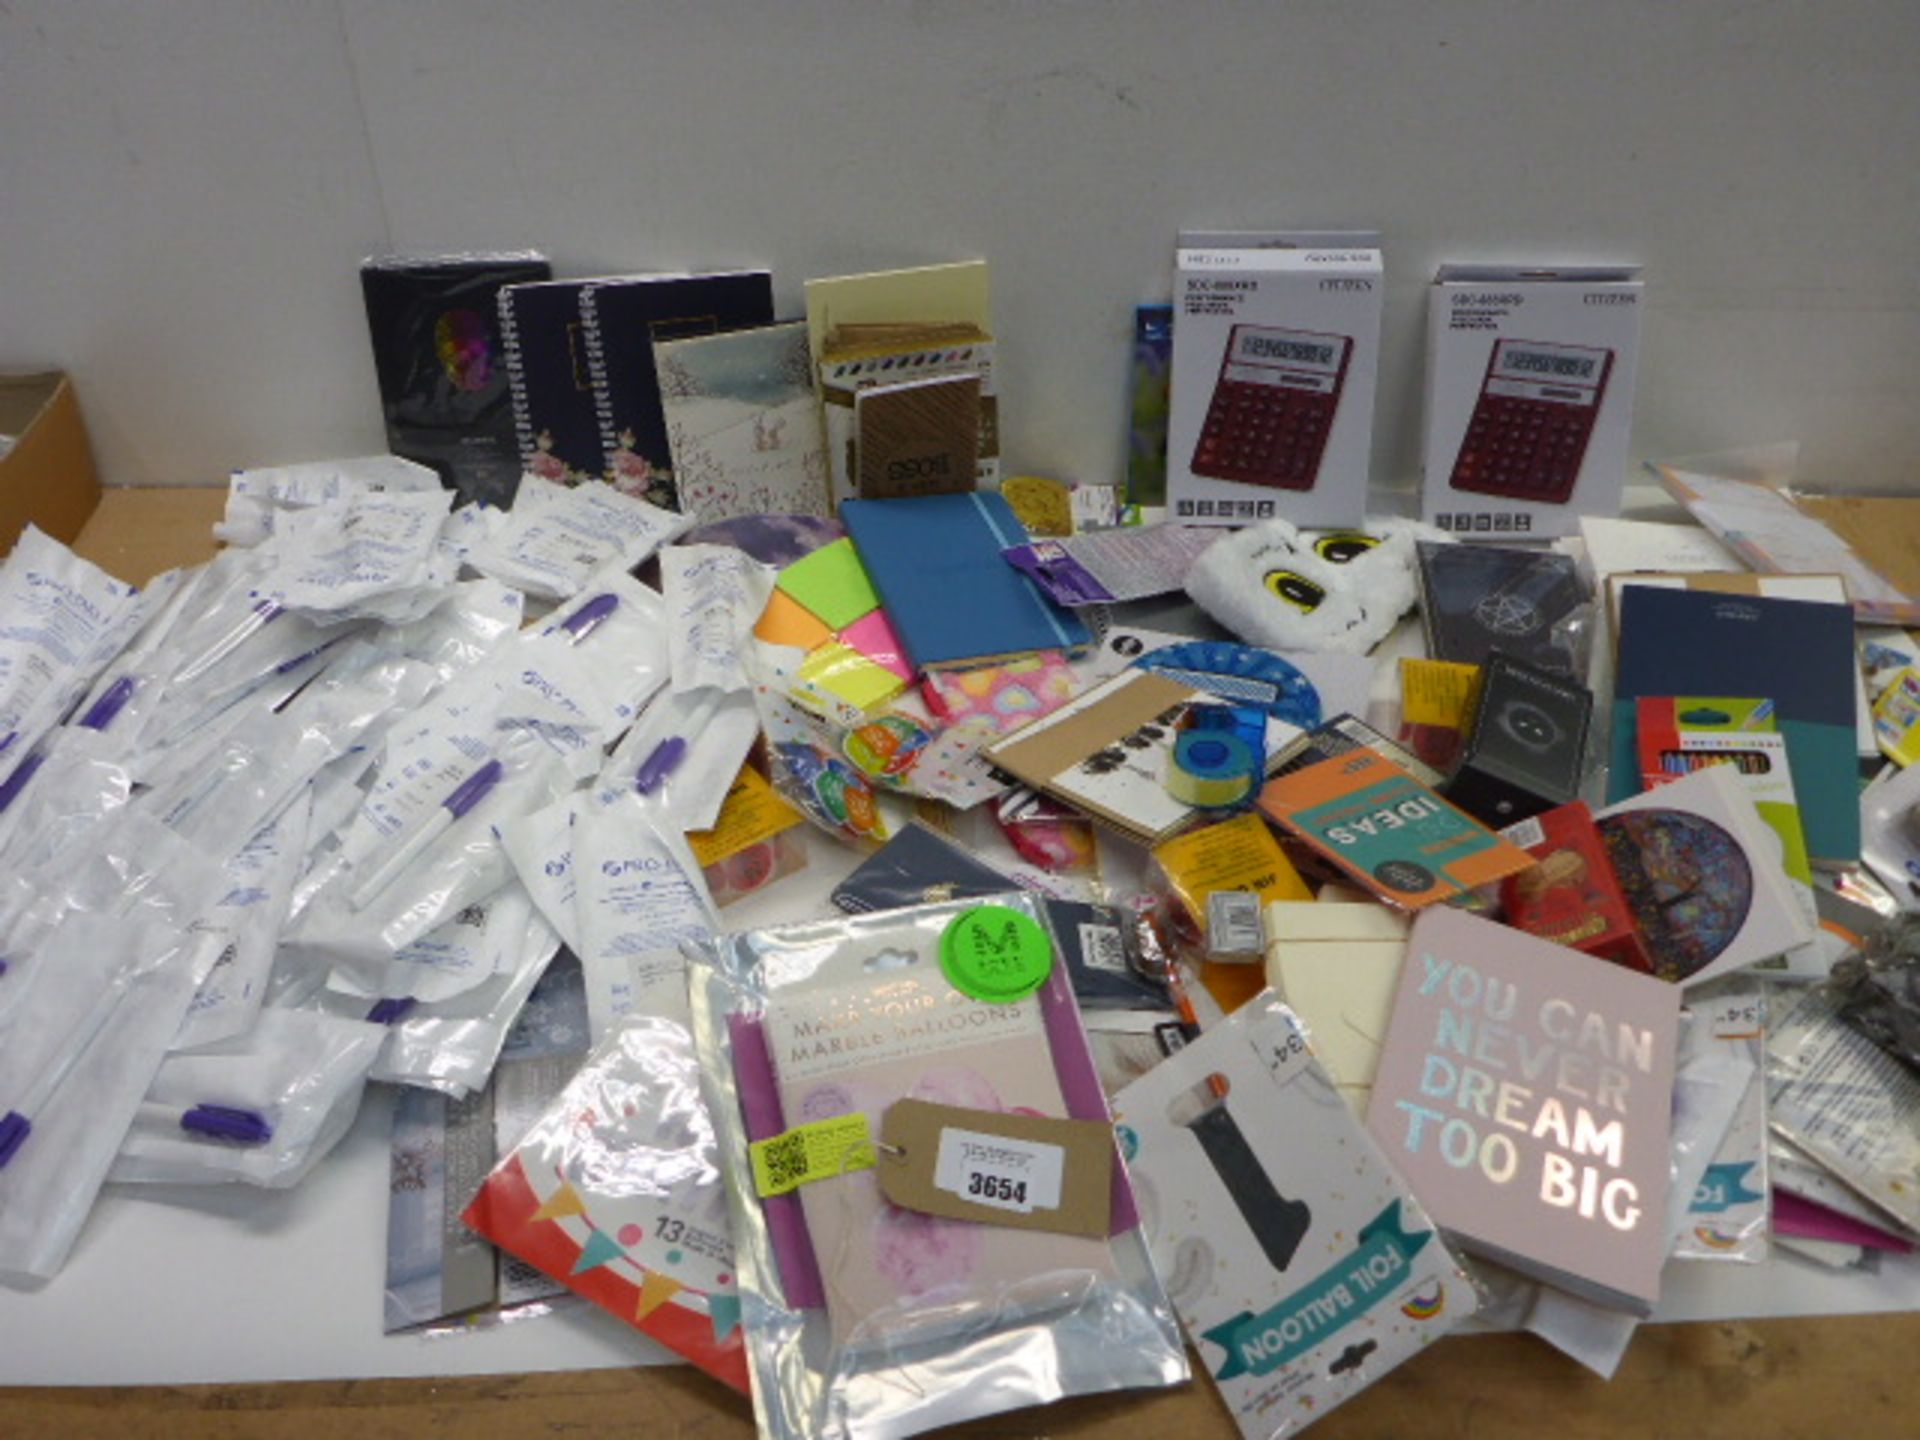 Large bag of stationery including pens, pencils, marker pens, note books, journals, diaries,